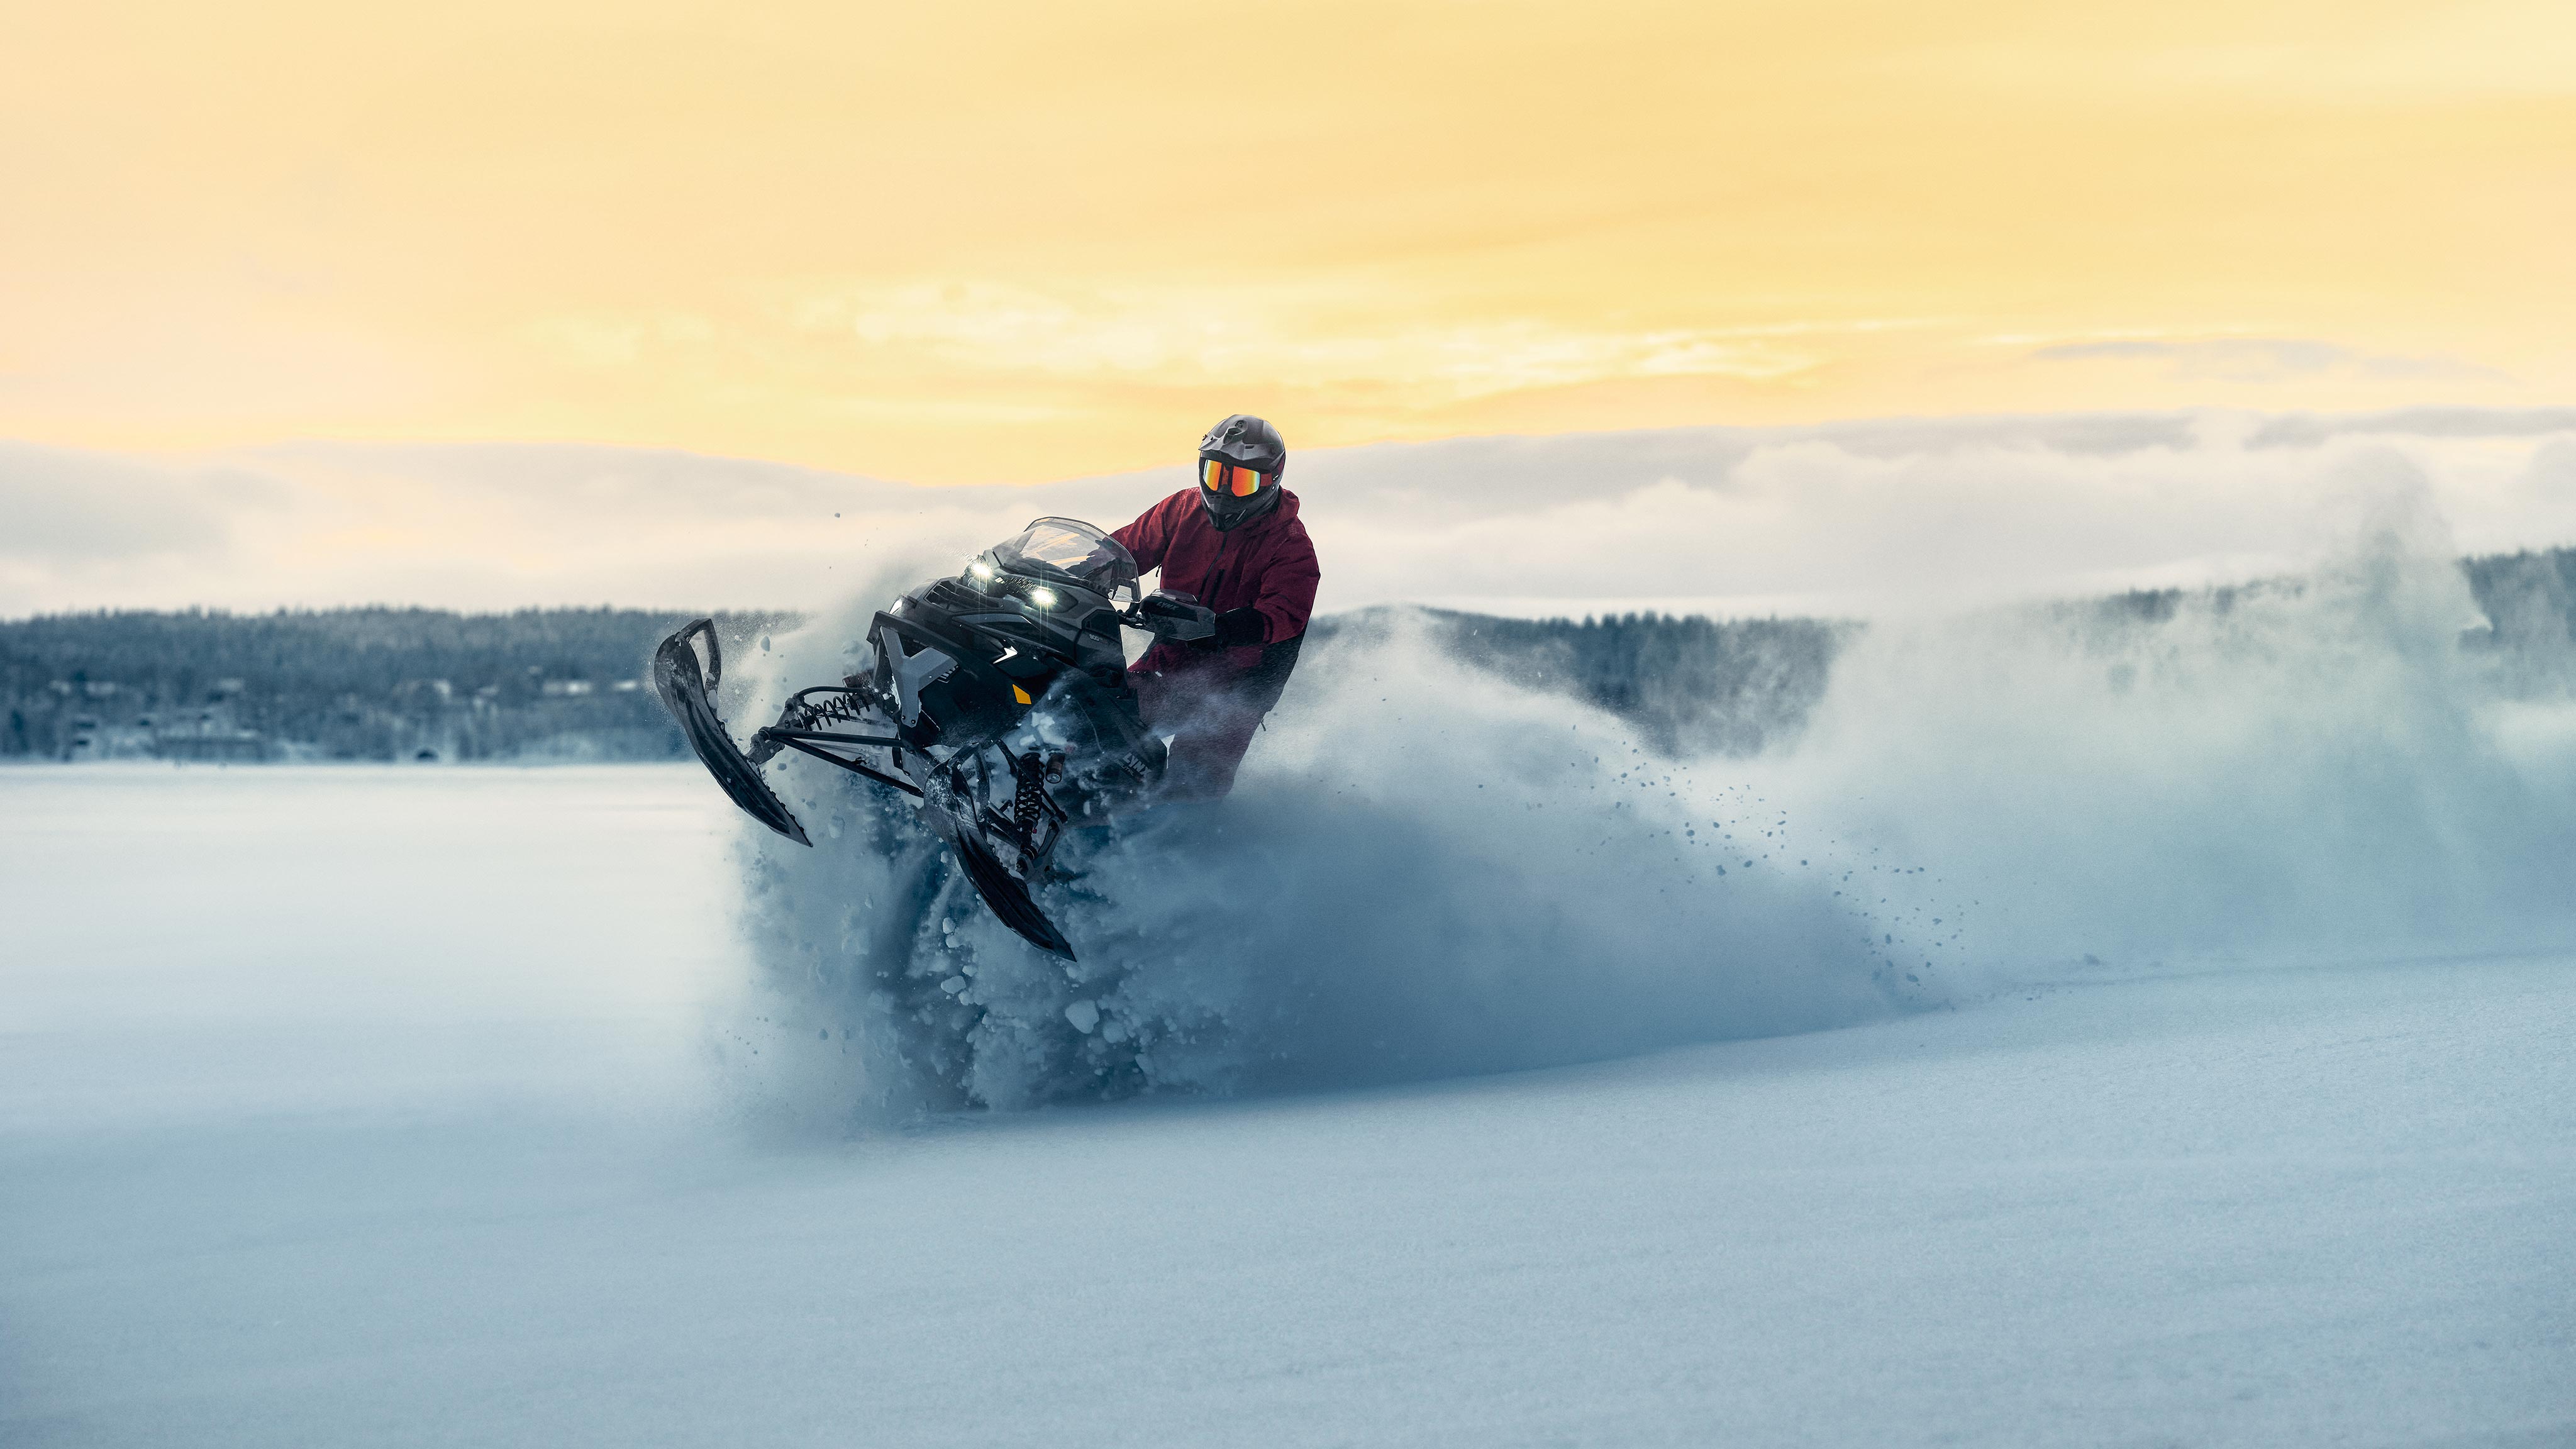  Lynx Brutal RE 2025 snowobile parked on lake ice at sunrise